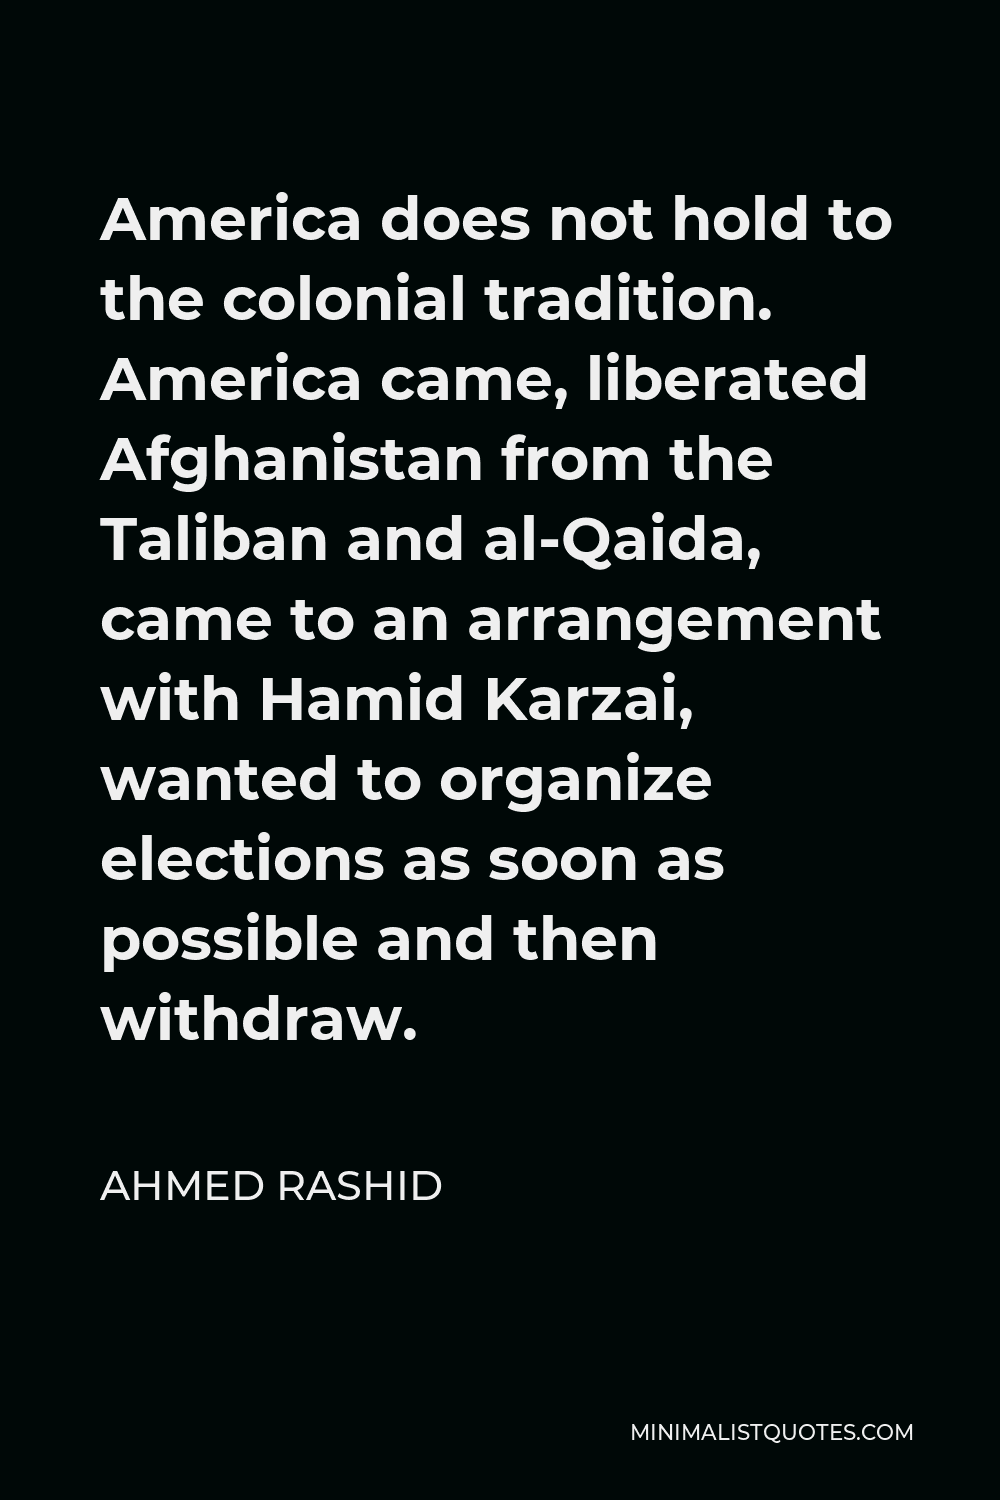 Ahmed Rashid Quote - America does not hold to the colonial tradition. America came, liberated Afghanistan from the Taliban and al-Qaida, came to an arrangement with Hamid Karzai, wanted to organize elections as soon as possible and then withdraw.